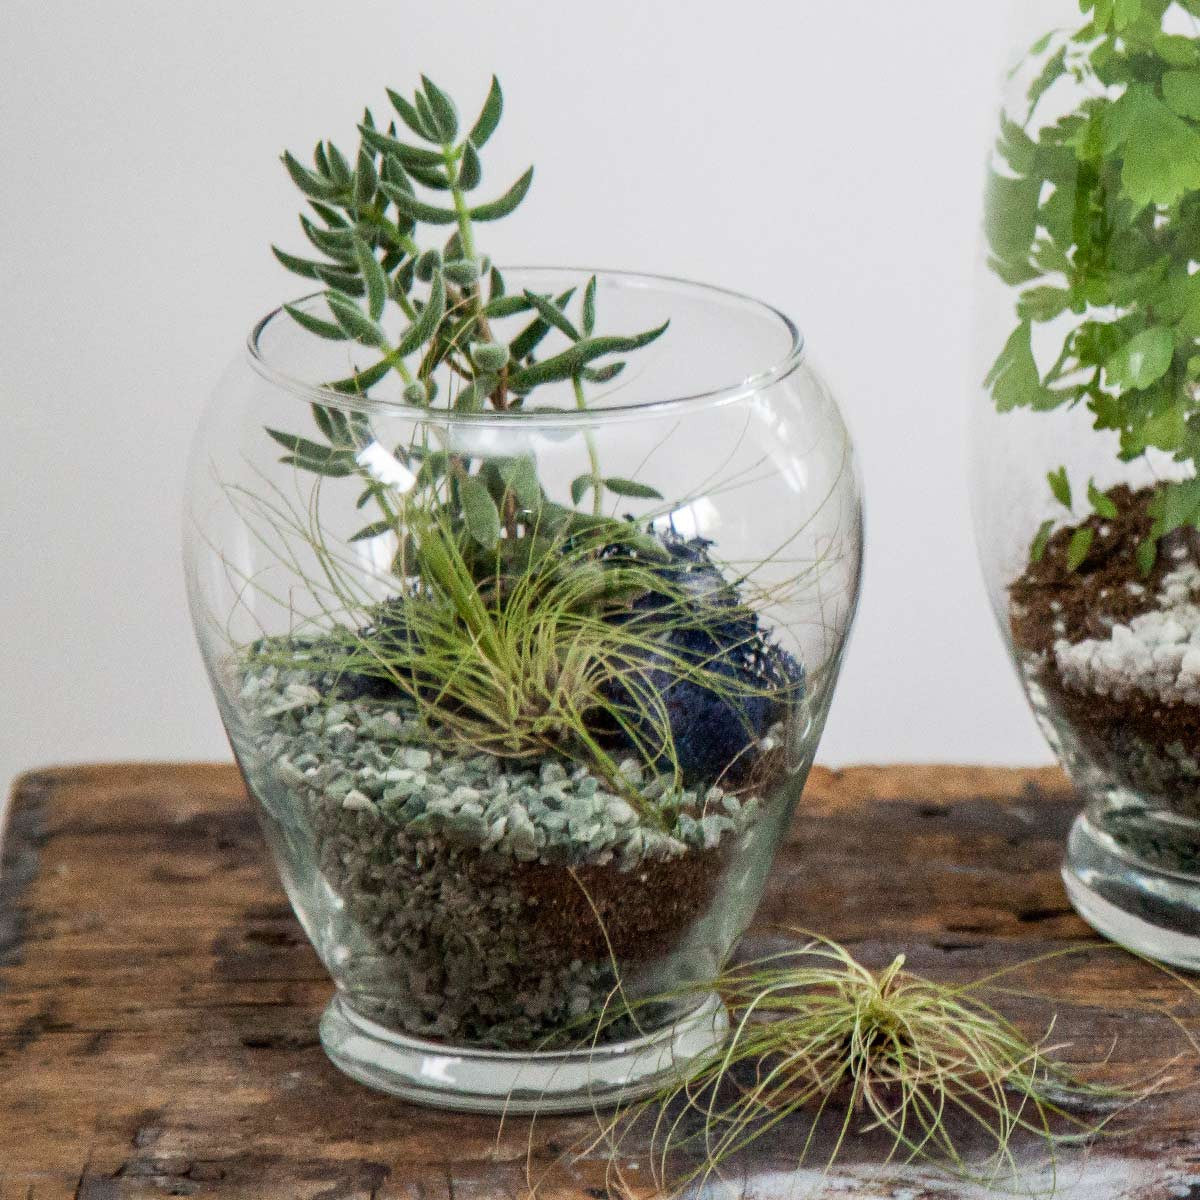 A small, round Serenity glass vase containing a miniature garden with a variety of succulents and air plants, layered with natural stones and pebbles, sitting on a rustic wooden surface with a blurred background featuring another plant.